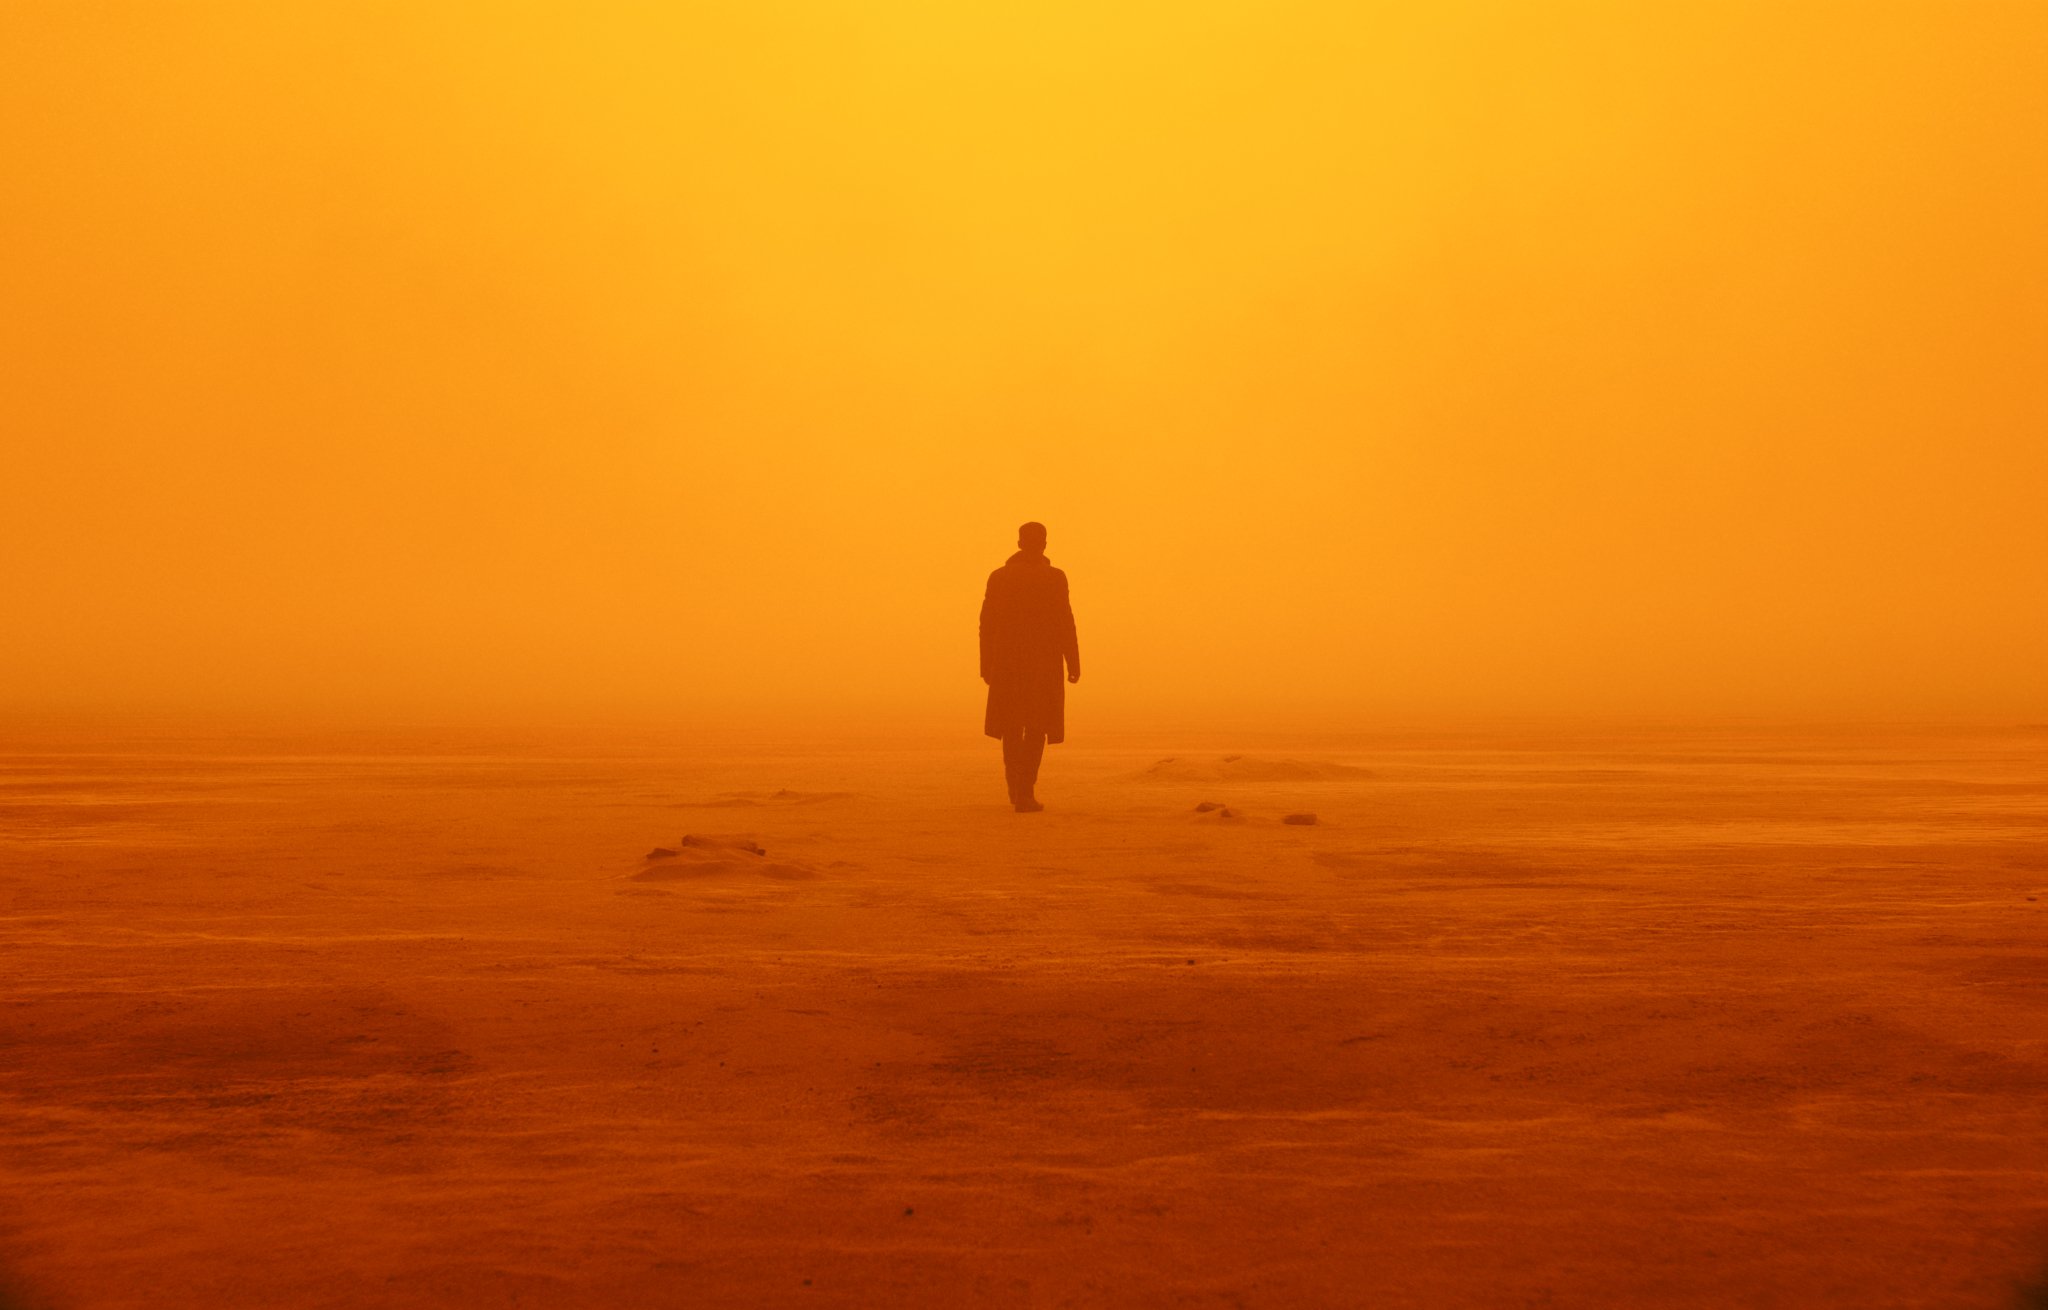 79 Blade Runner 2049 HD Wallpapers Background Images   Wallpaper 2048x1310